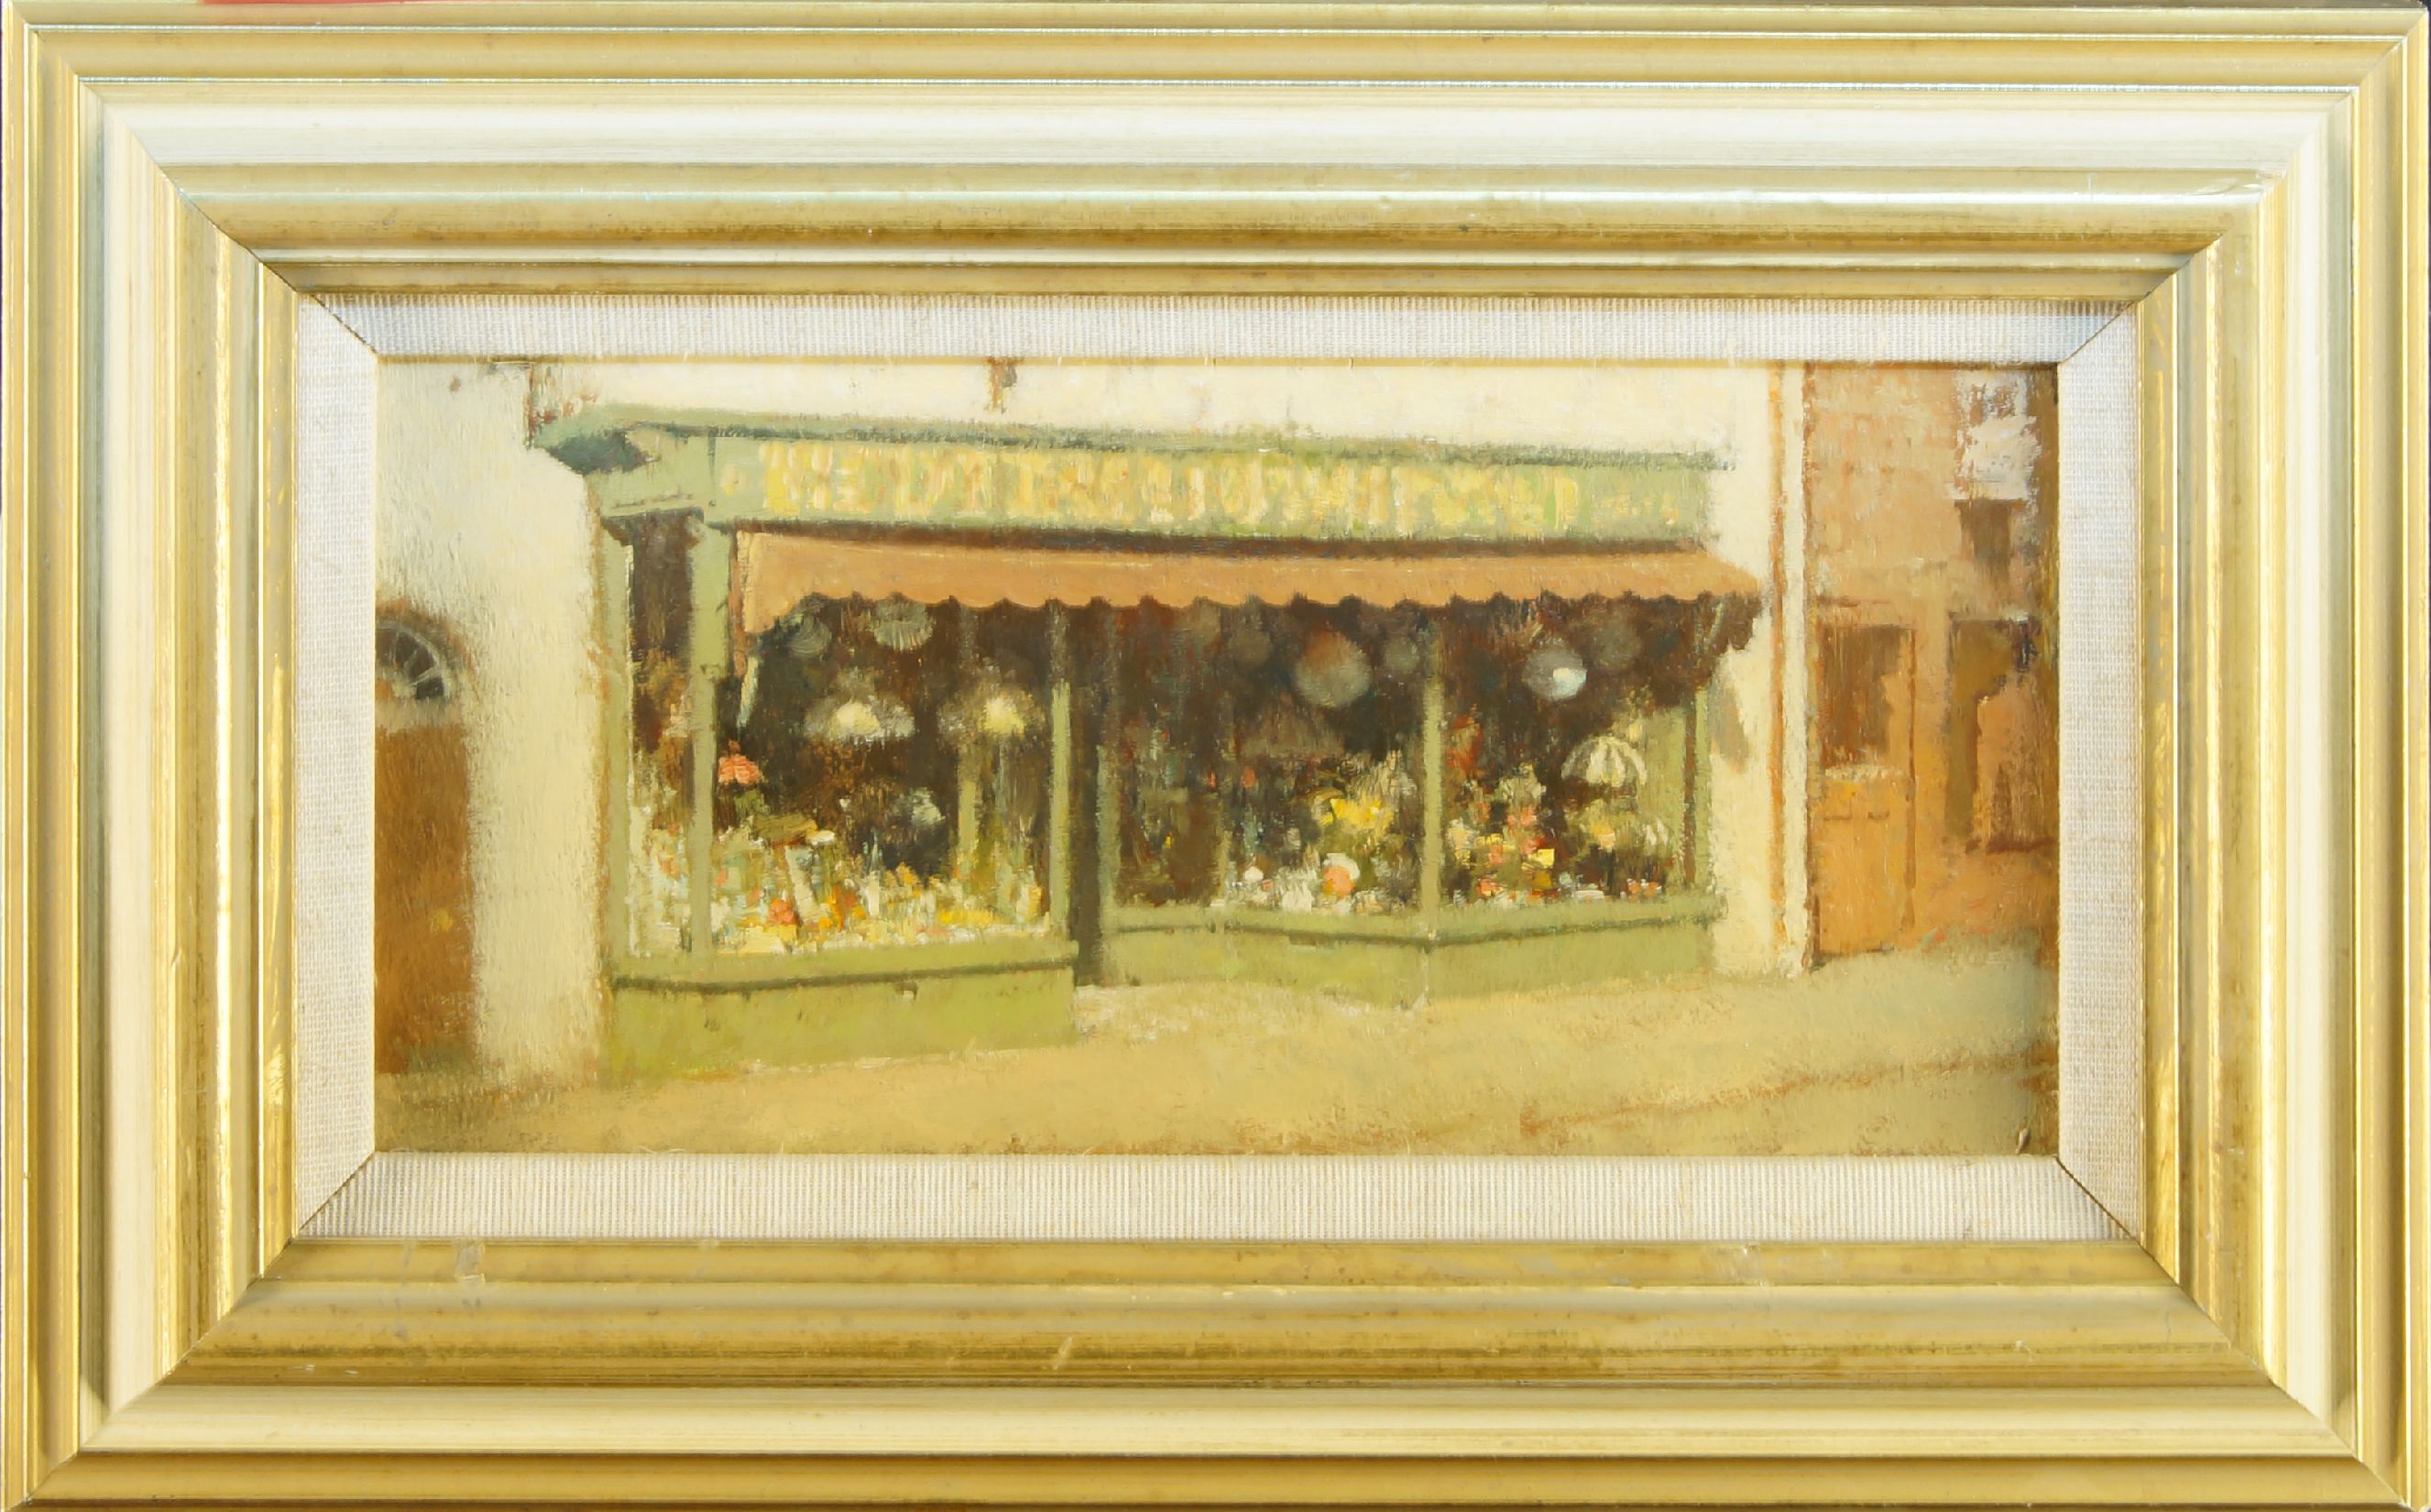 Oliver Ommanney, British, 20th century- Early morning south street, Bridport; oil on board, 9.5 x - Image 2 of 3